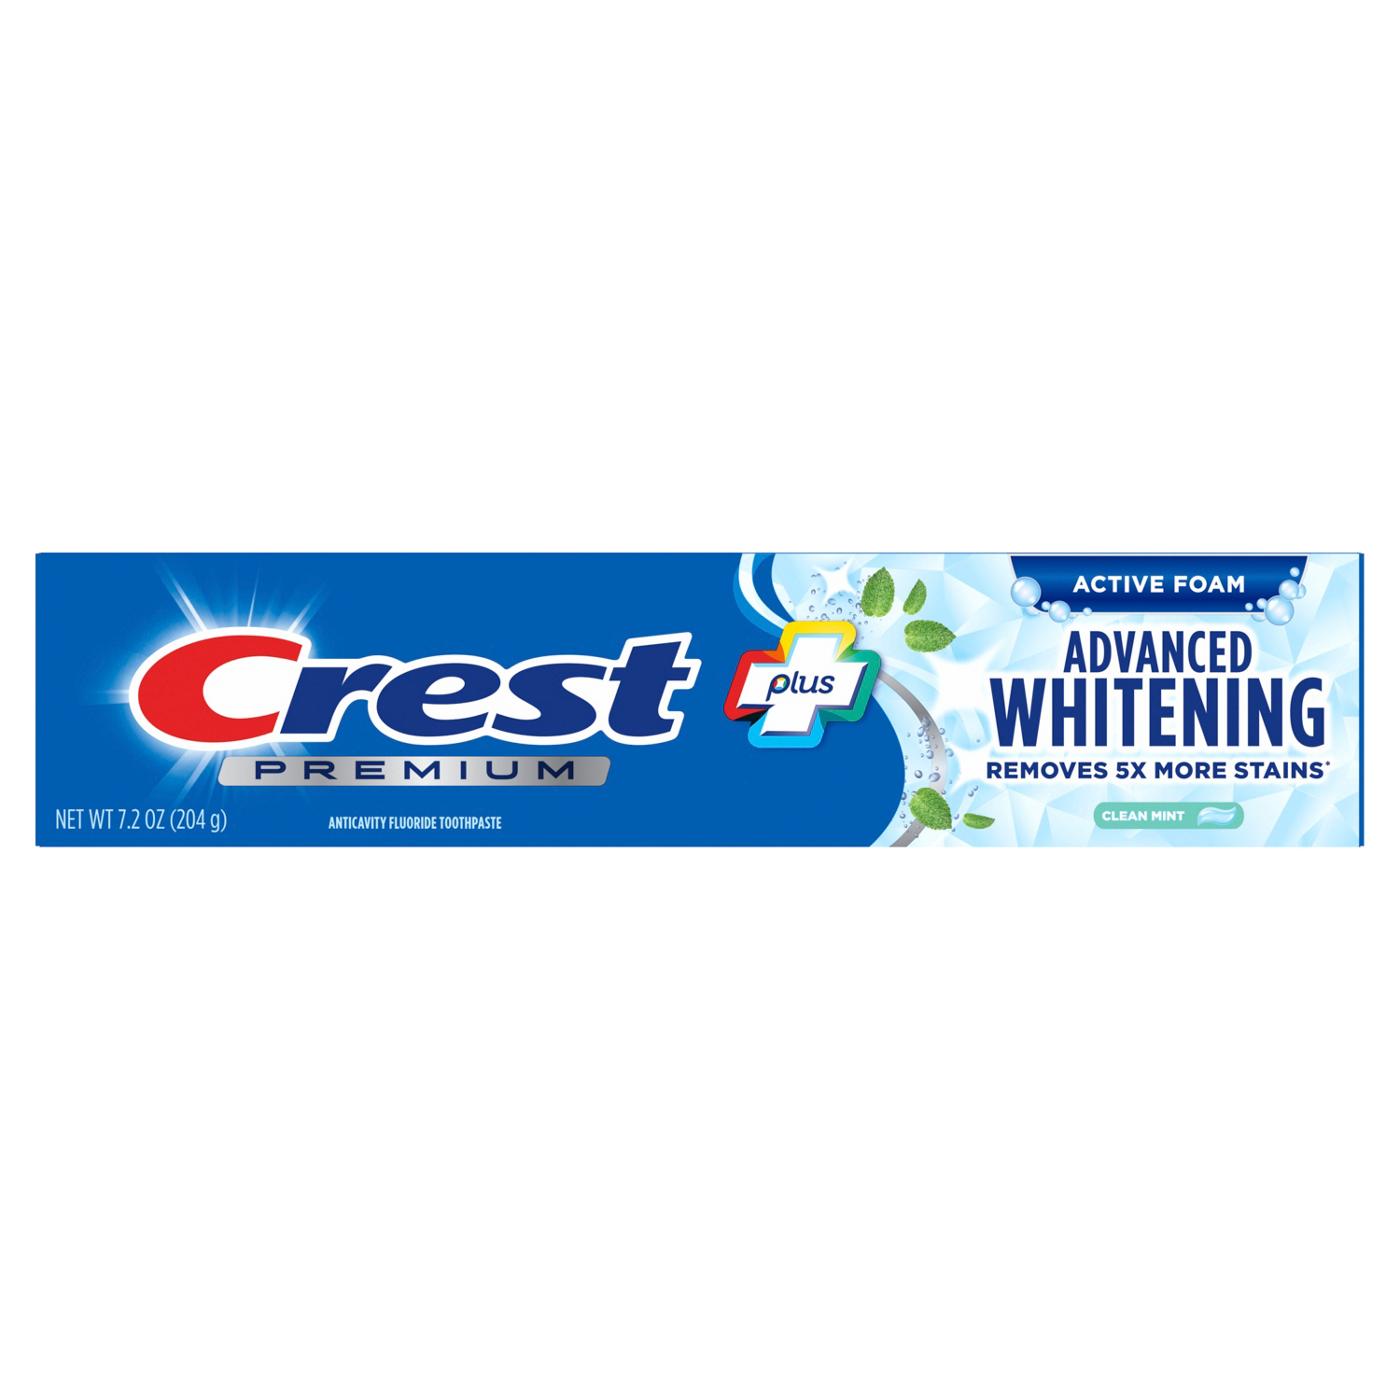 Crest Premium + Advanced Whitening Active Foam Toothpaste - Clean Mint; image 1 of 8